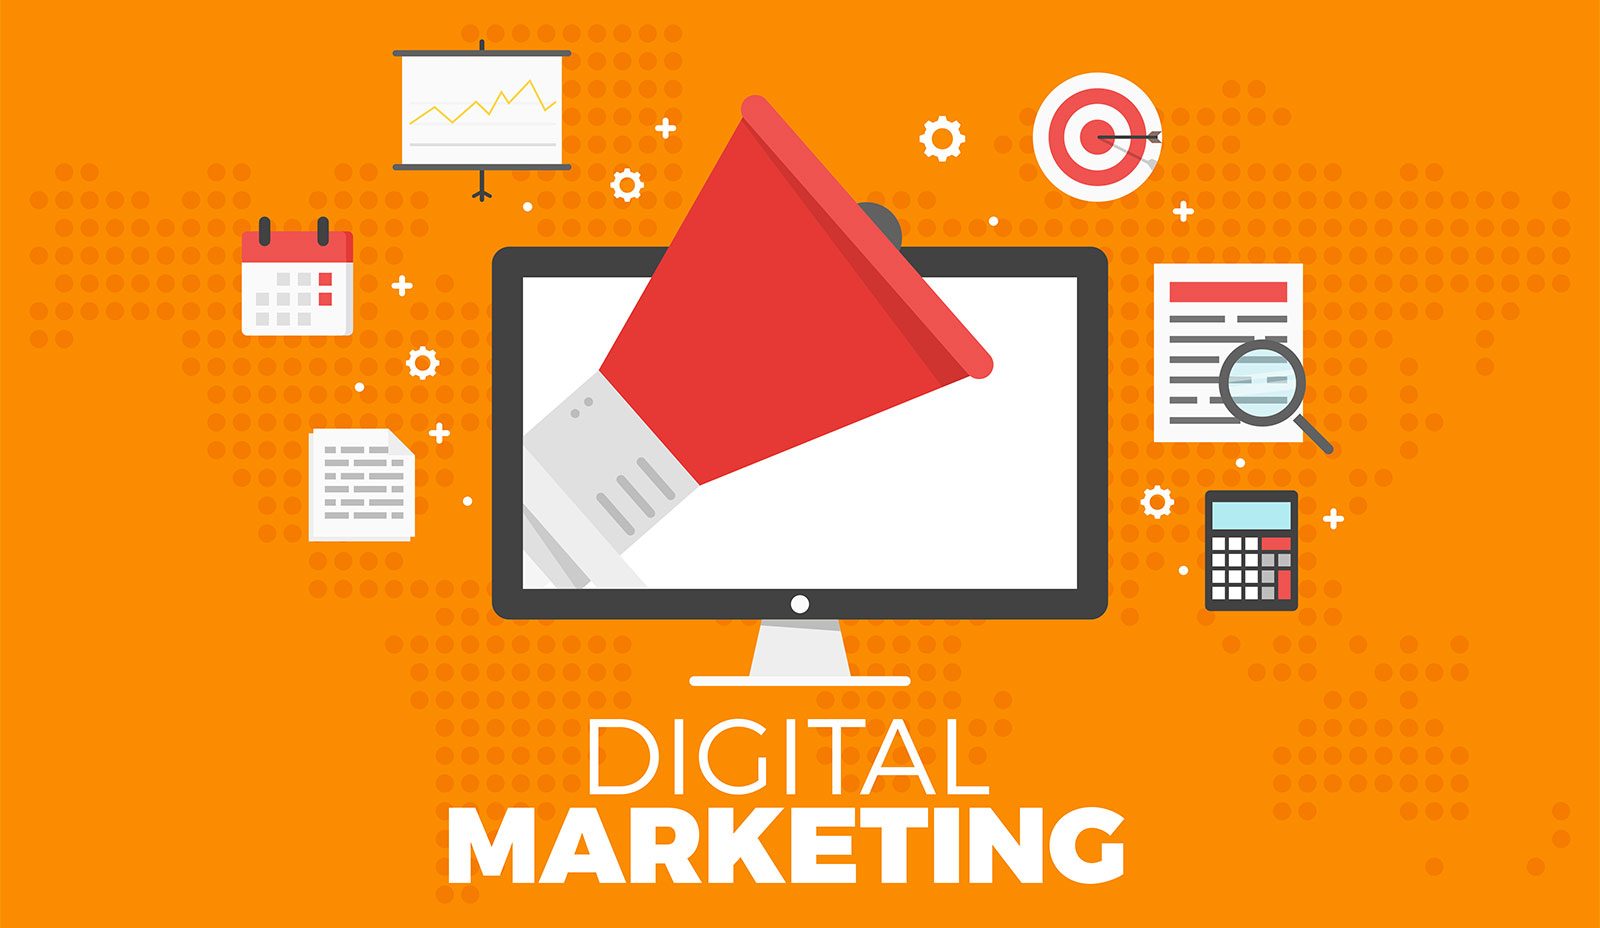 Digital Marketing Tips & Tricks to Get the Most of Online Advertising